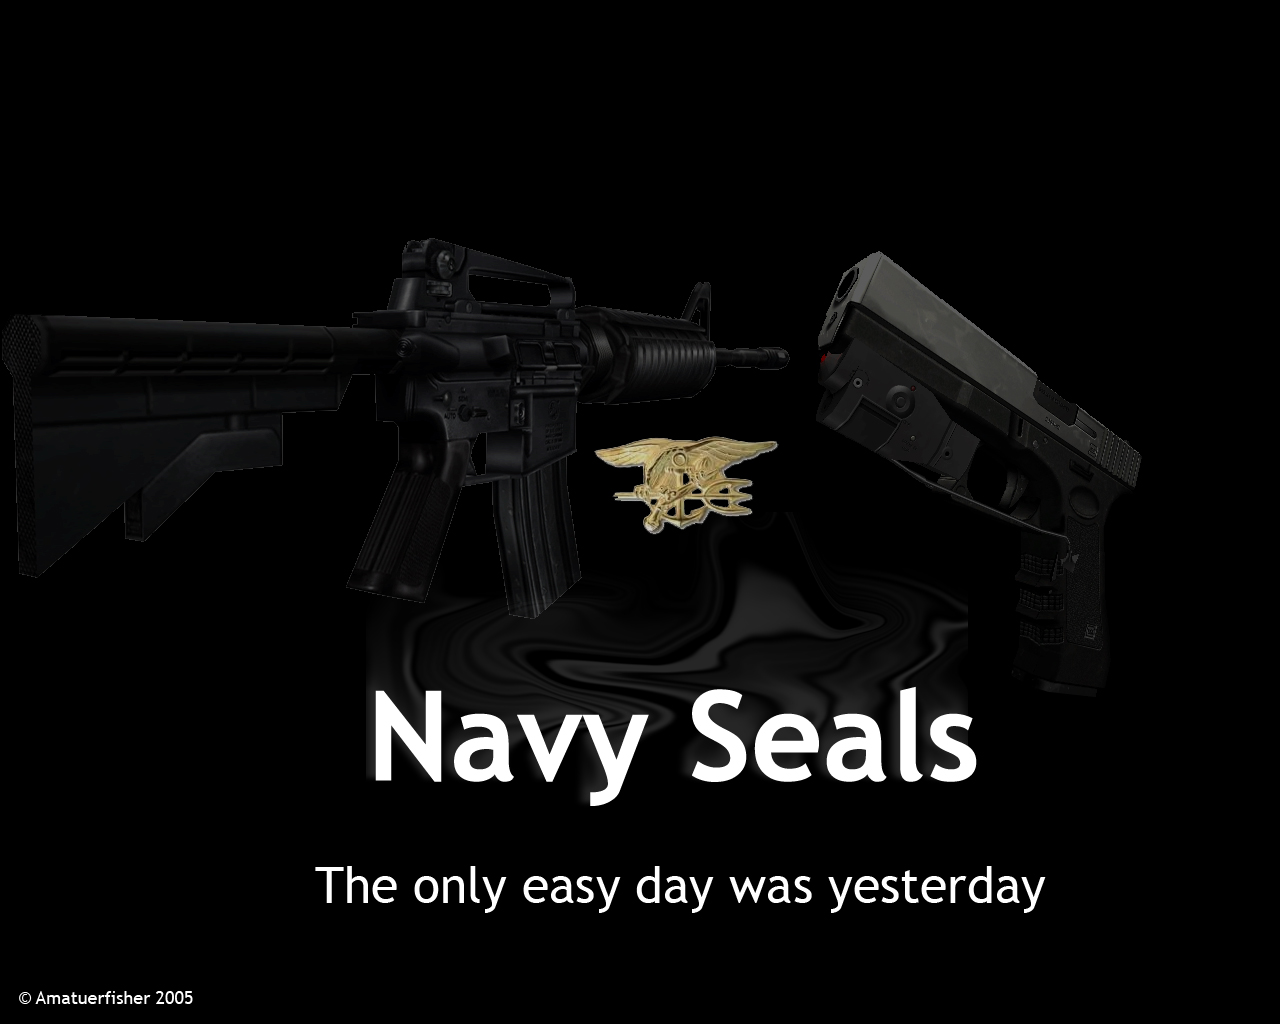 Navy Seals by amatuerfisher